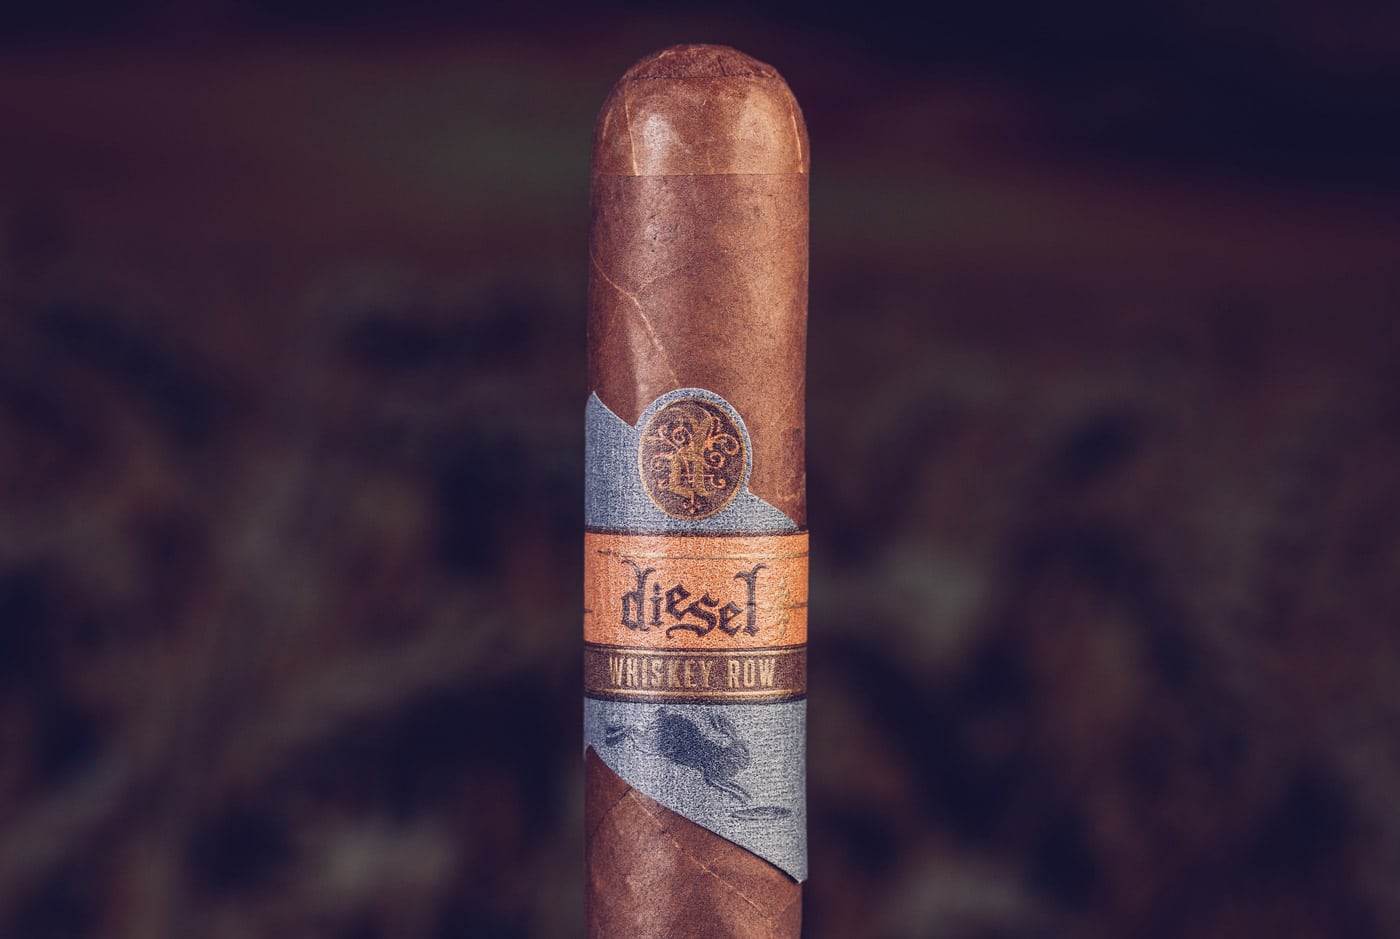 Diesel Whiskey Row Robusto cigar review